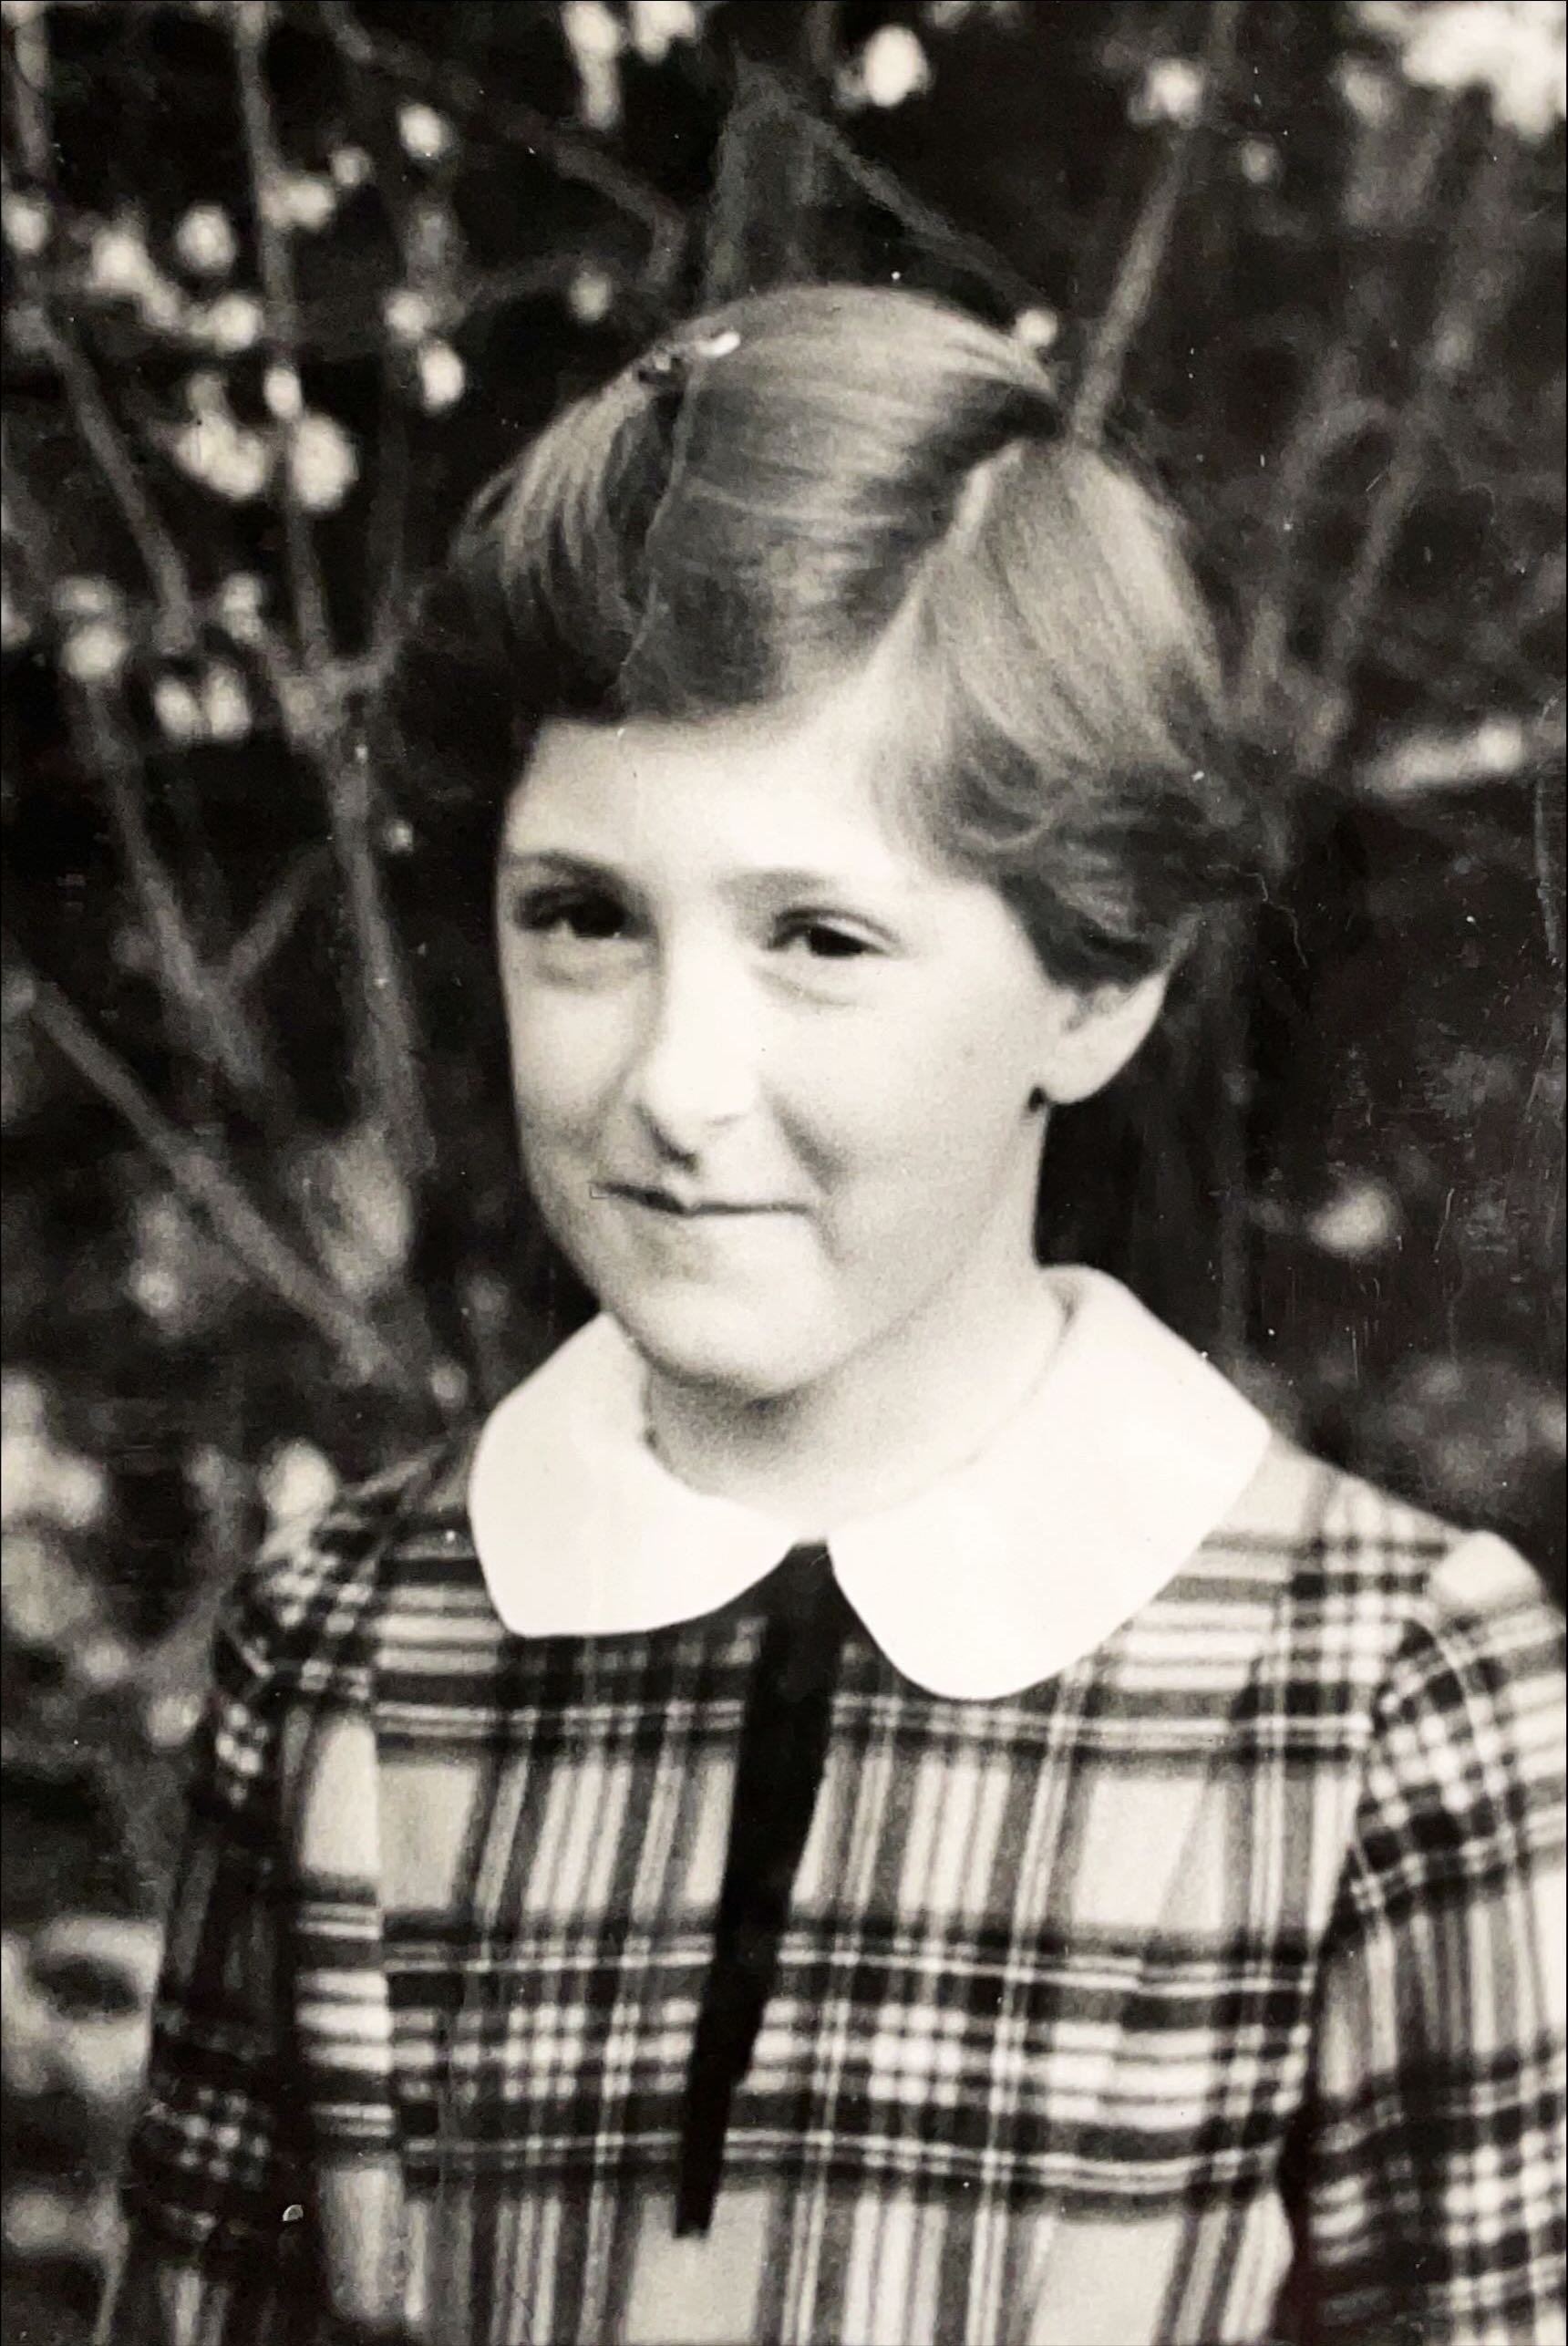 Sallie Ashfield, one of the four carriers of posies.